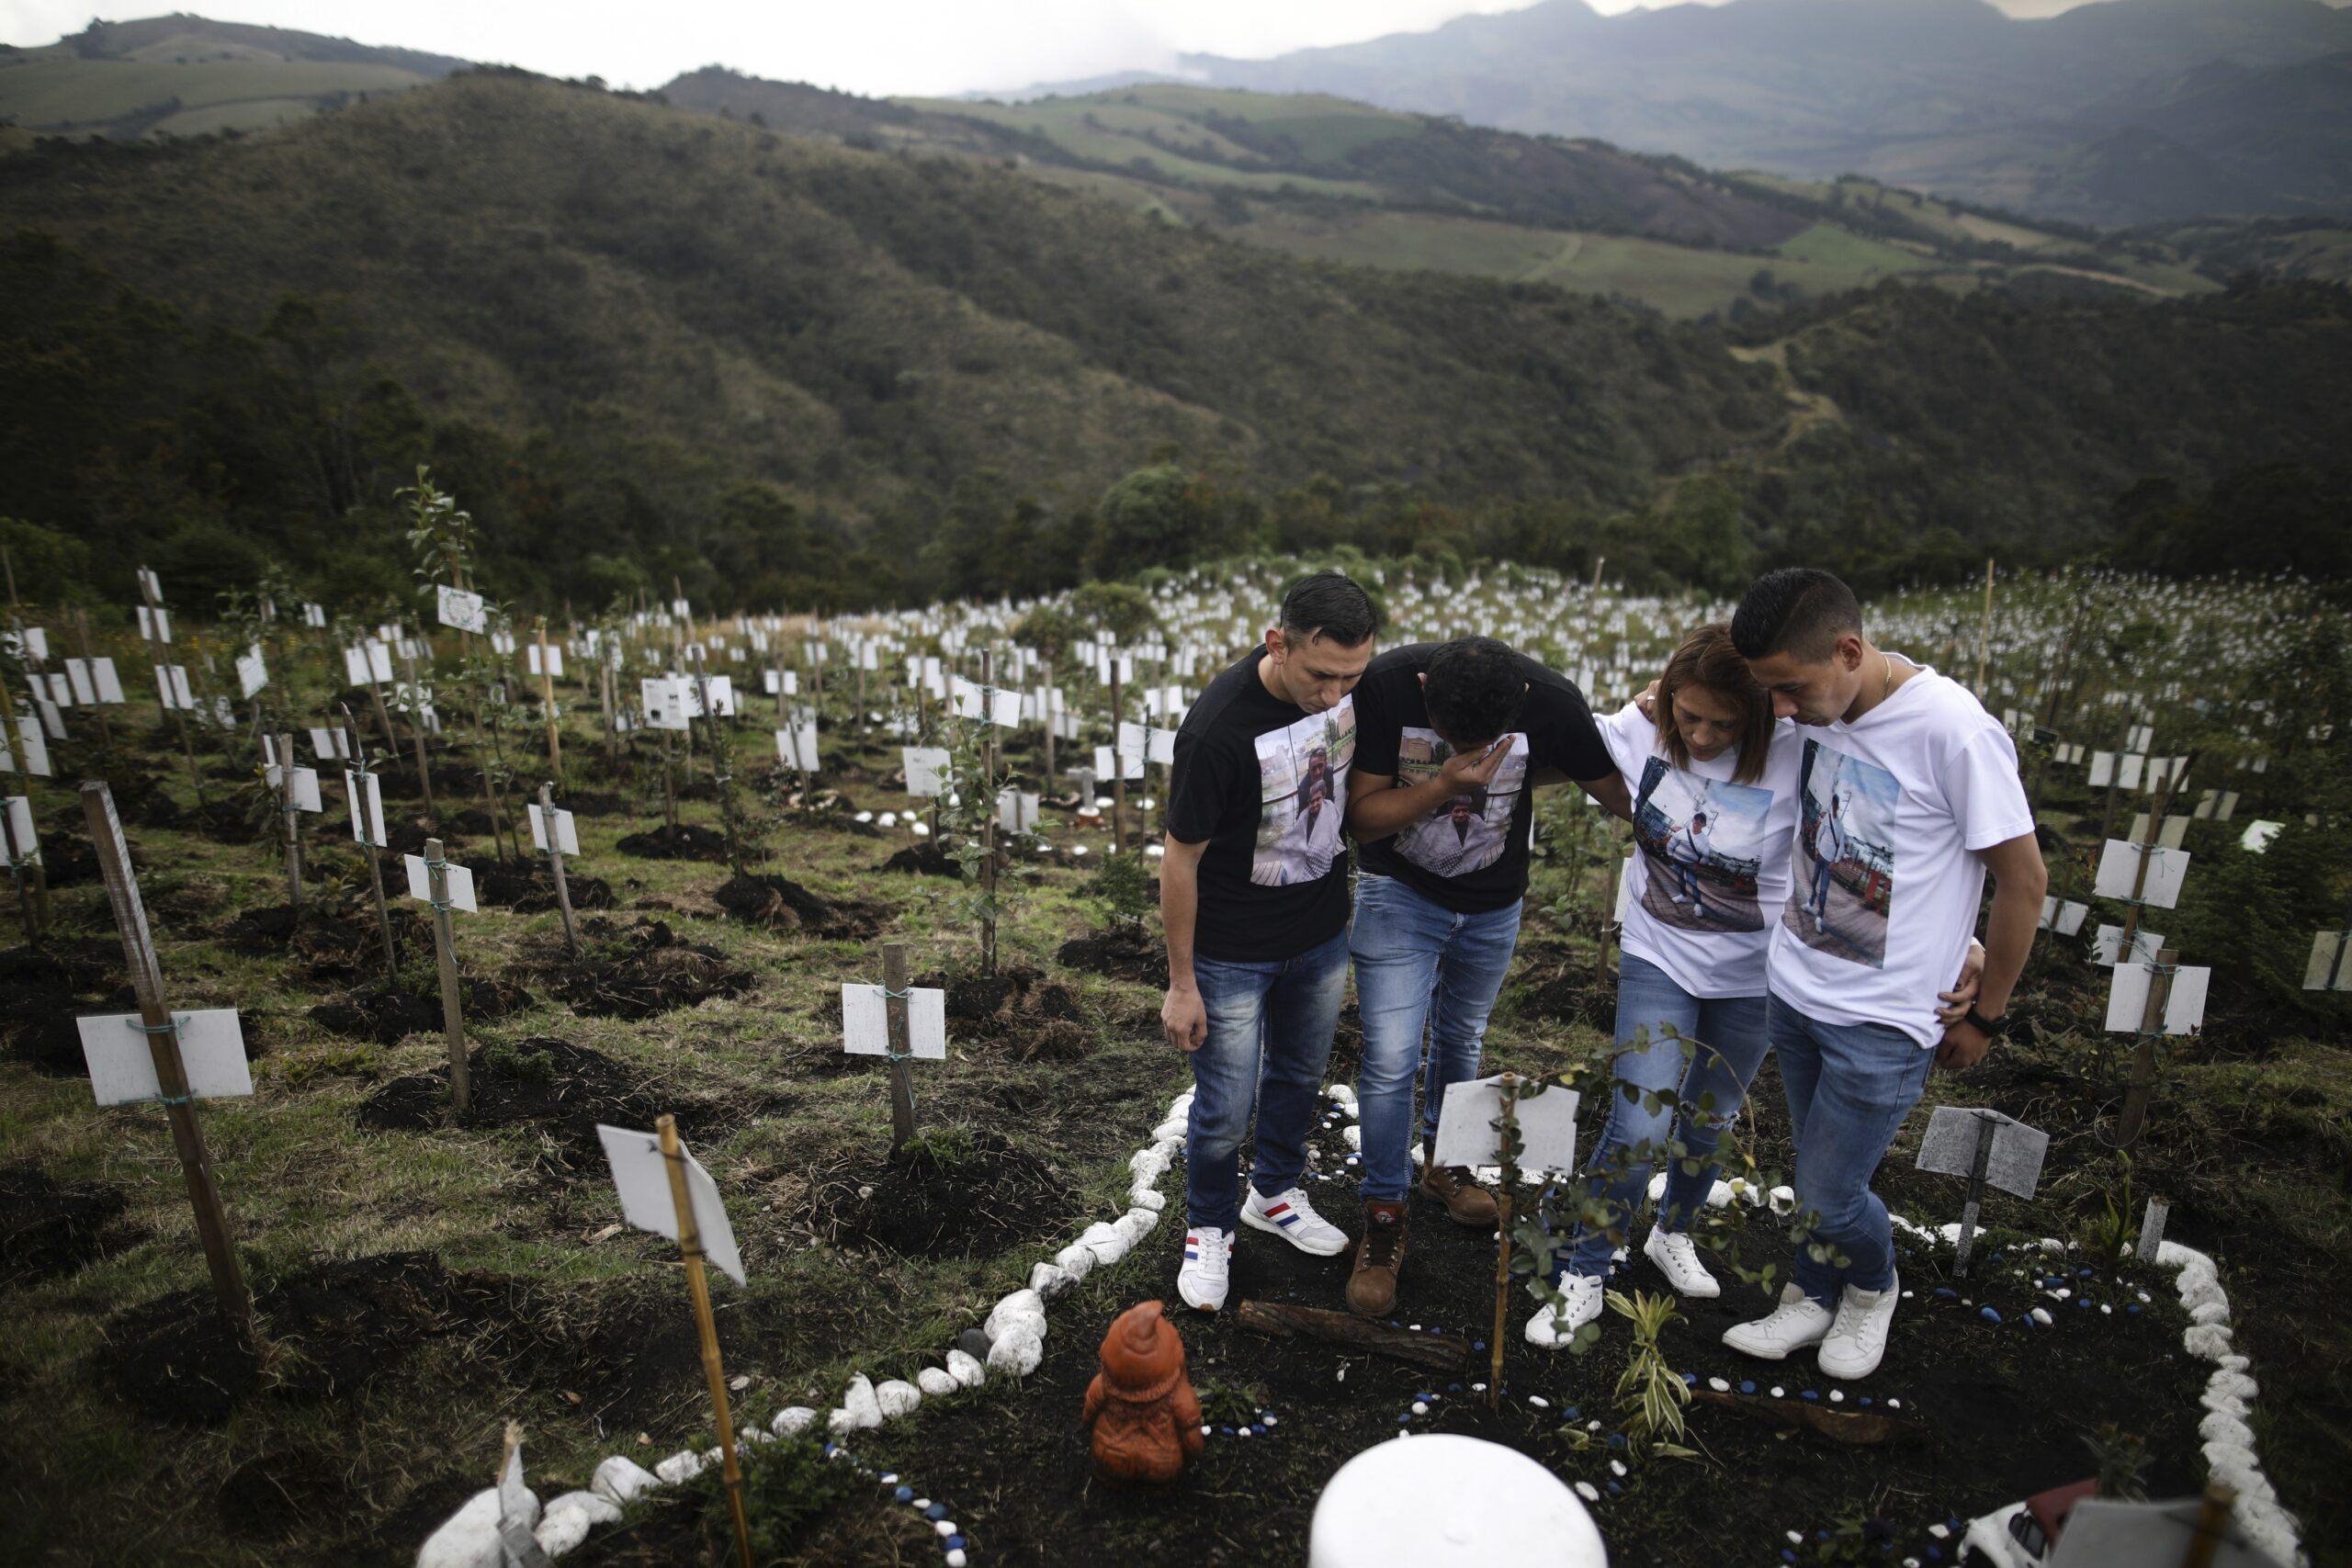 Relatives of Luis Enrique Rodriguez, who died of COVID-19, visit where he was buried on a hill at the El Pajonal de Cogua Natural Reserve, in Cogua, north of Bogota, Colombia, Monday, Oct. 25, 2021. Rodriguez died May 14, 2021. Relatives bury the ashes of their loved ones who died of coronavirus and plant a tree in their memory. (AP Photo/Ivan Valencia)